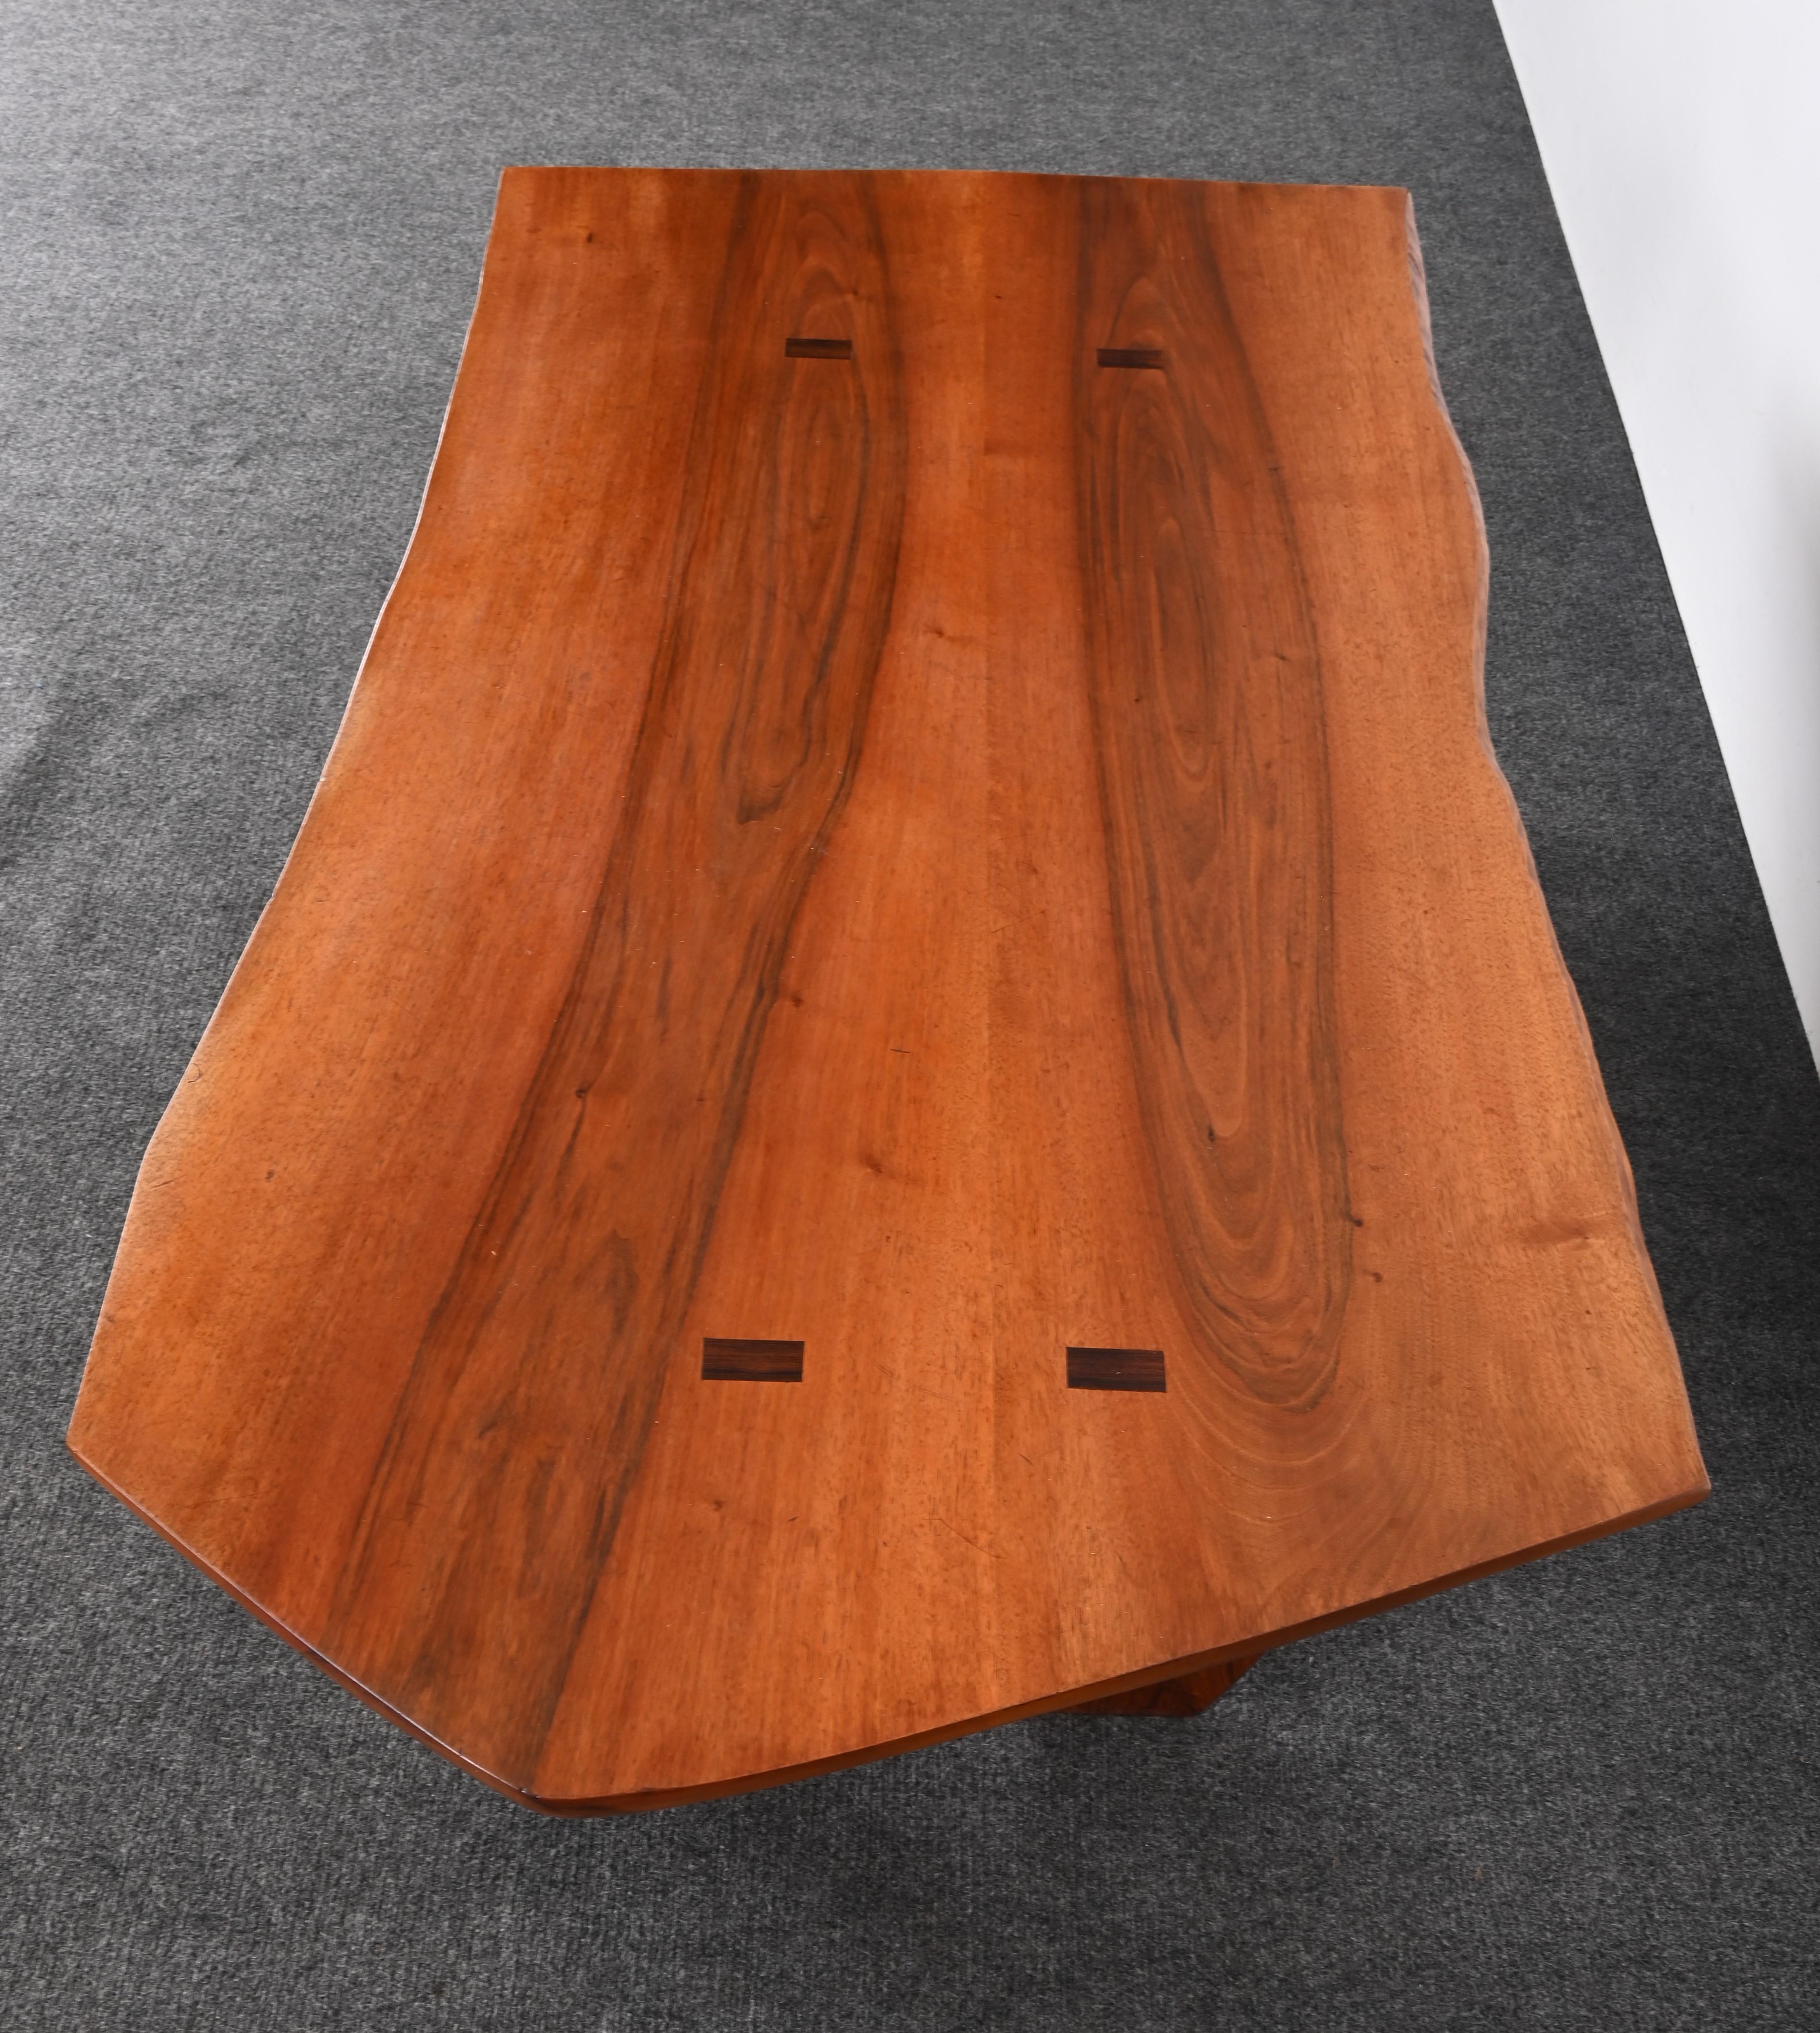 Live Edge Solid Walnut and Rosewood Coffee Table by Richard Rothbard, 1968 For Sale 9